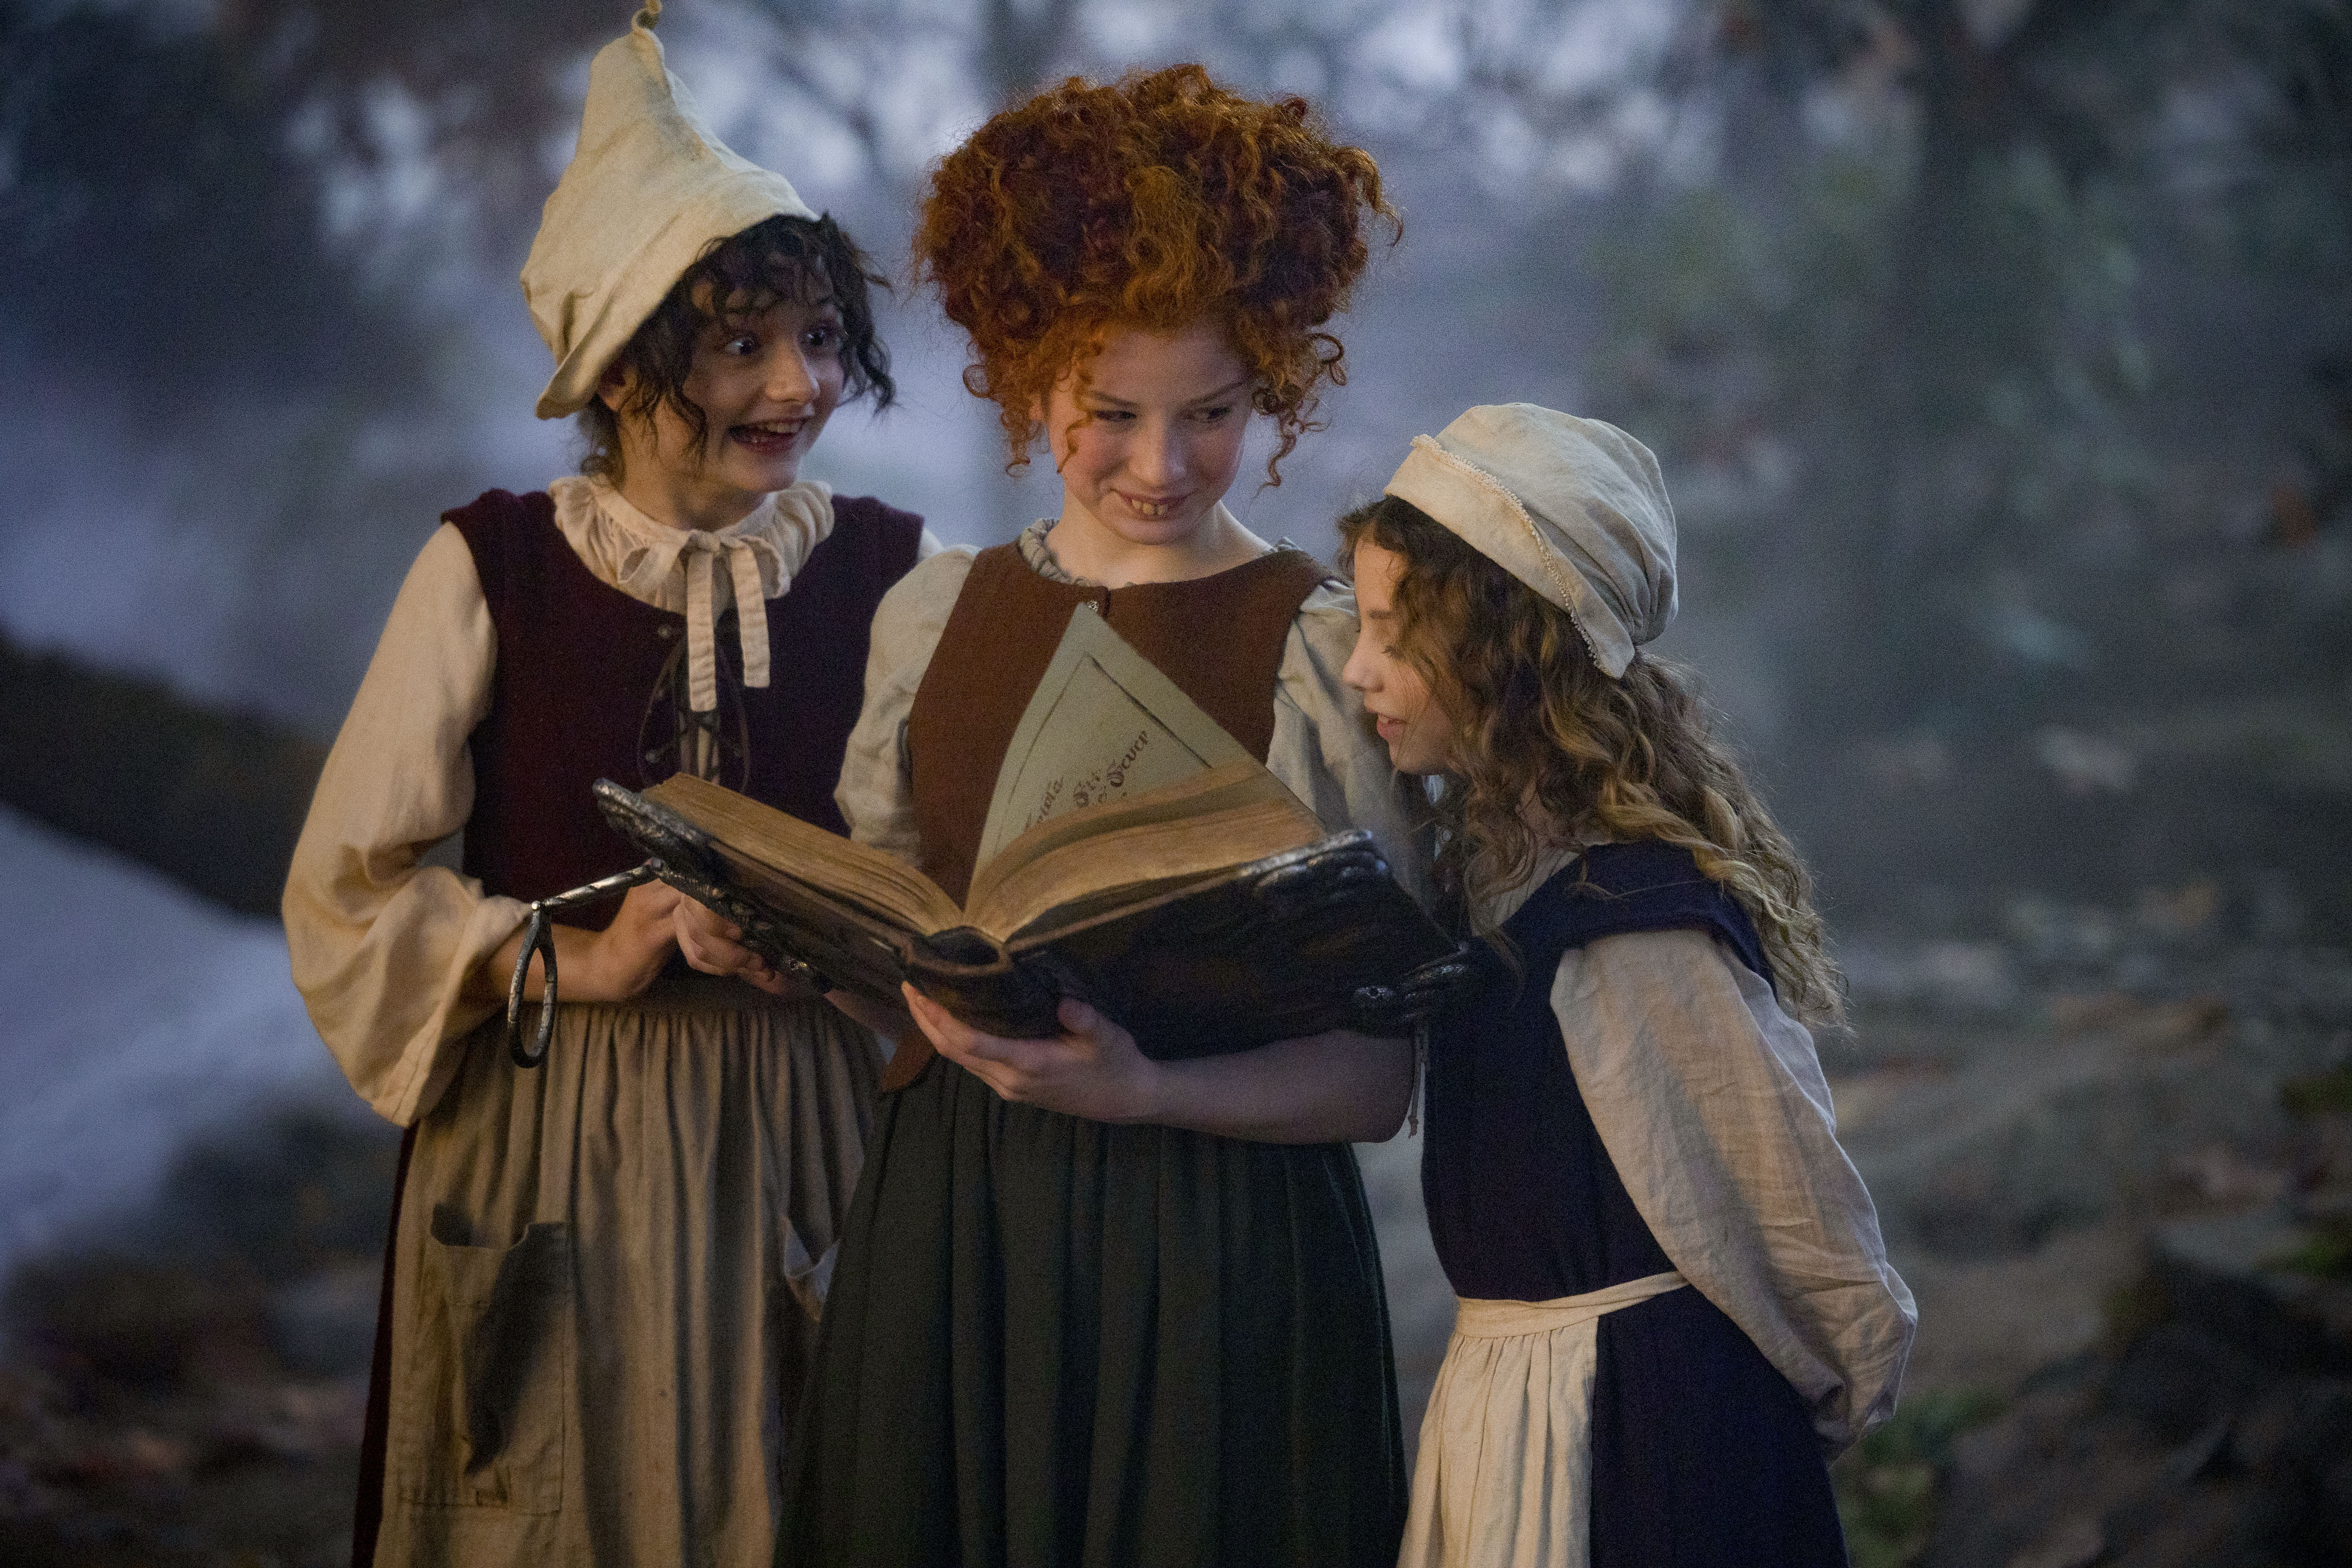 (L-R): Nina Kitchen as Young Mary, Taylor Henderson as Young Winifred, and Juju Brener as Young Sarah in HOCUS POCUS 2, exclusively on Disney+. Photo by Matt Kennedy. © 2022 Disney Enterprises, Inc. All Rights Reserved.